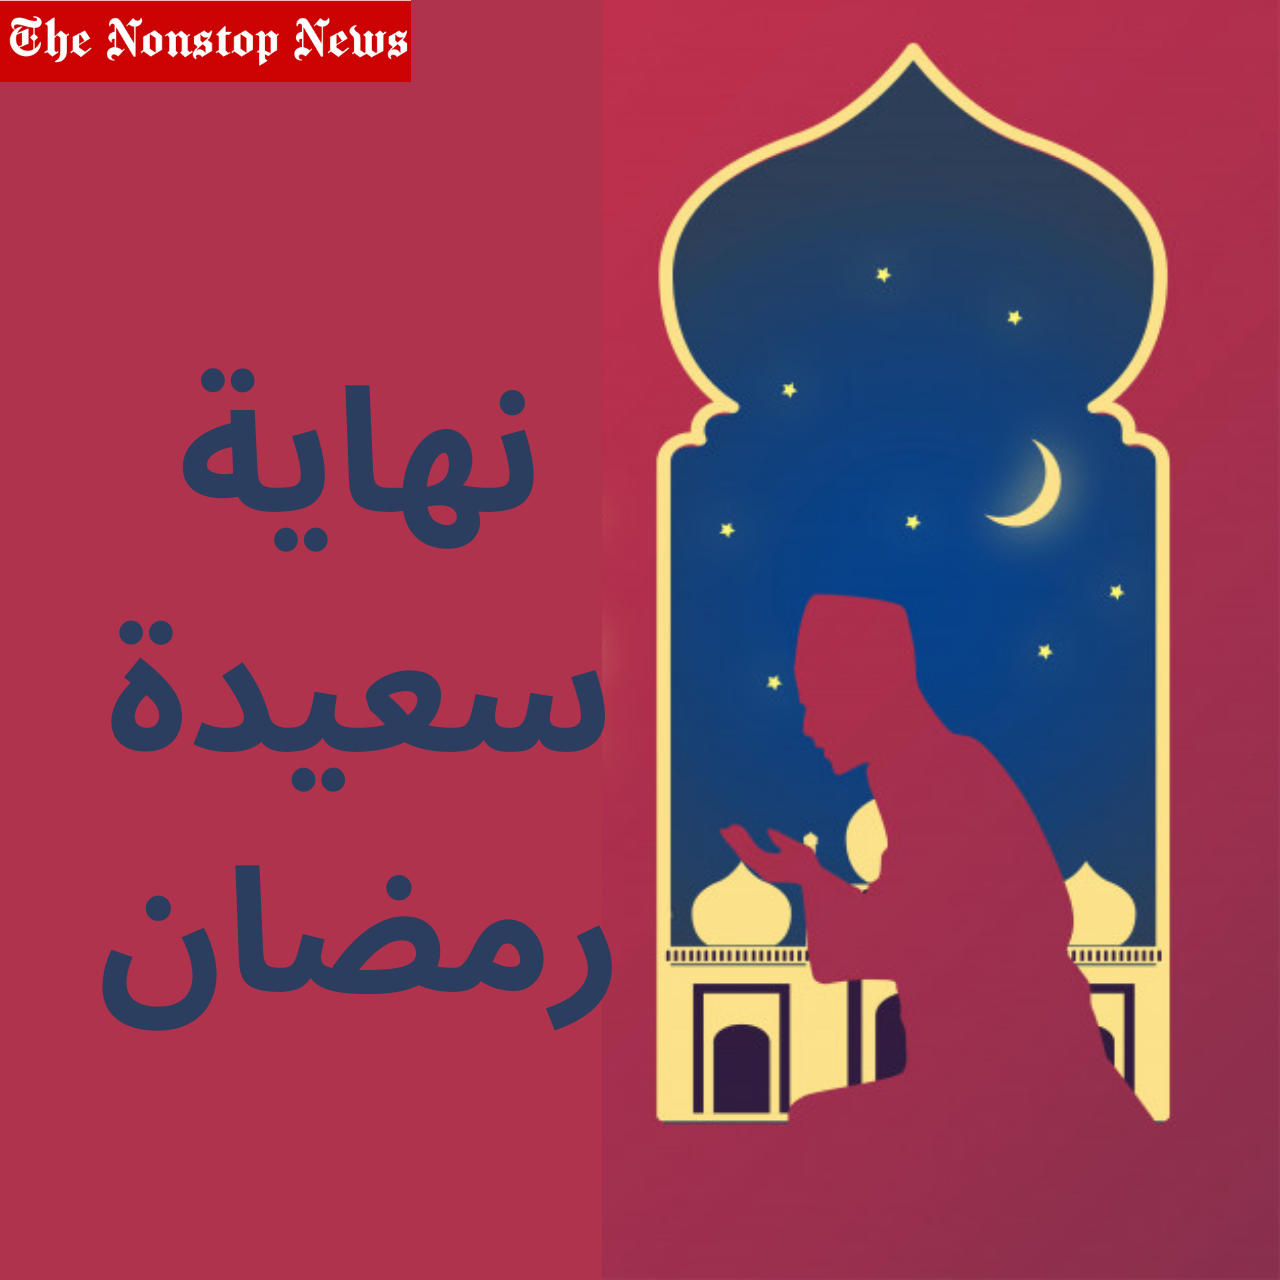 Happy End Ramadan 2021 wishes in Arabic, Quotes, Messages, Greetings and, Images to Share